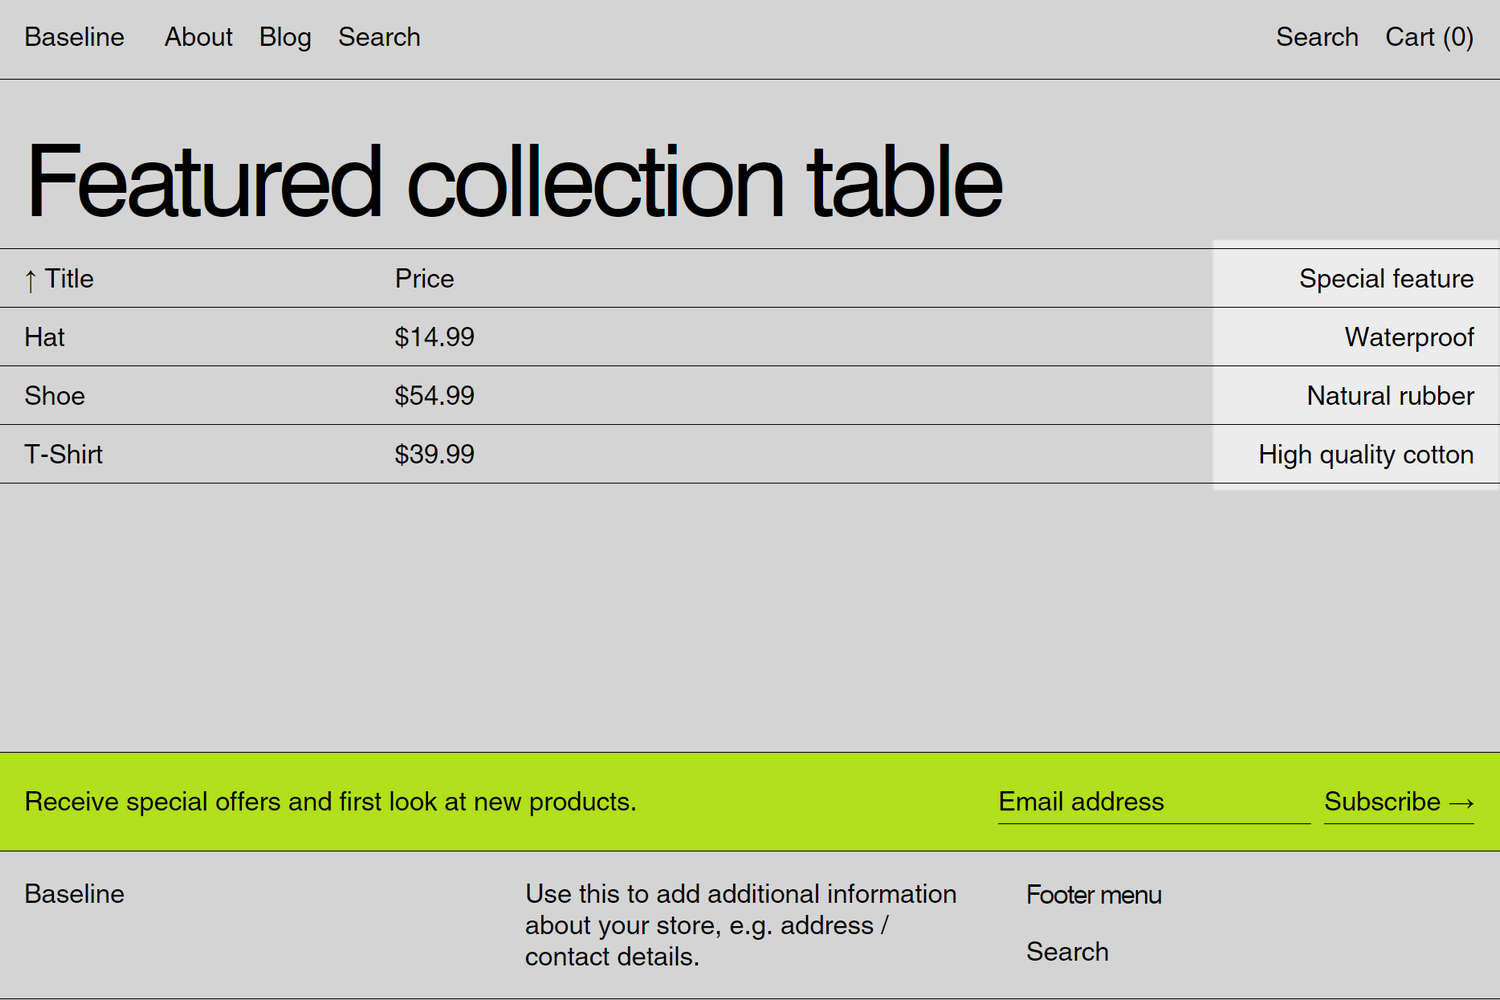 A Featured collection table section on a store's home page.